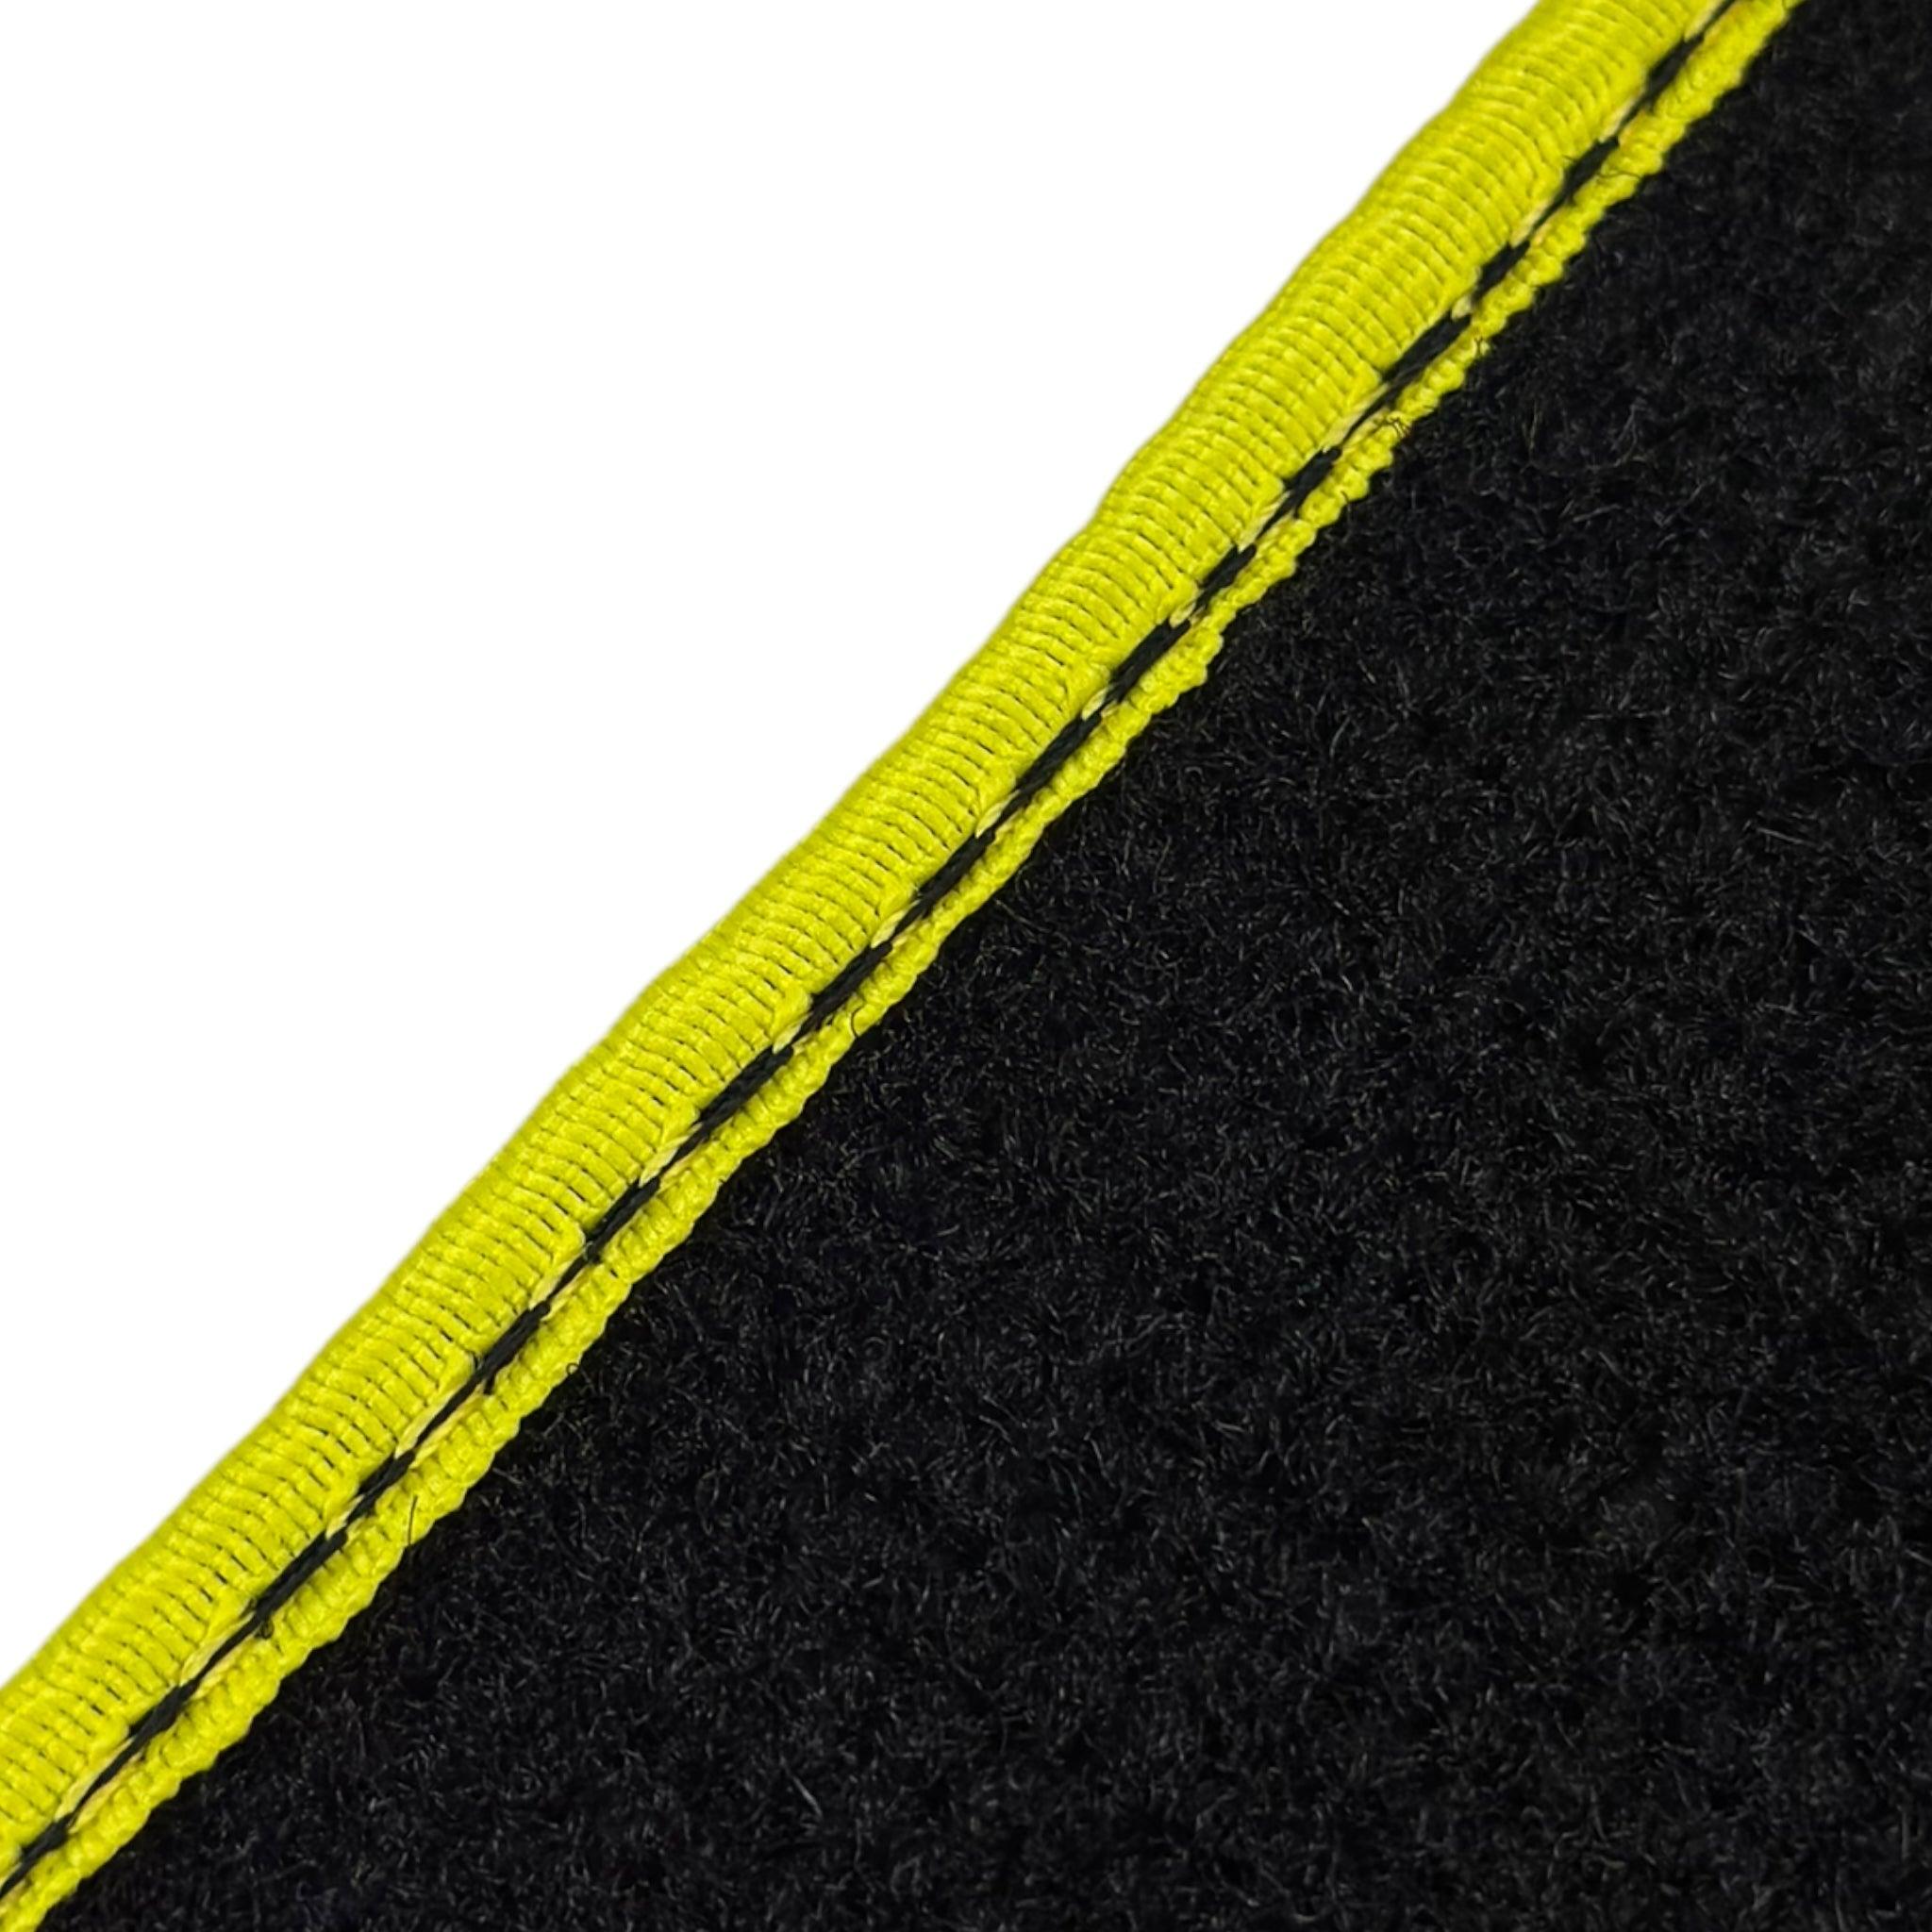 Black Floor Mats For BMW 5 Series G31 Wagon | Fighter Jet Edition | Yellow Trim